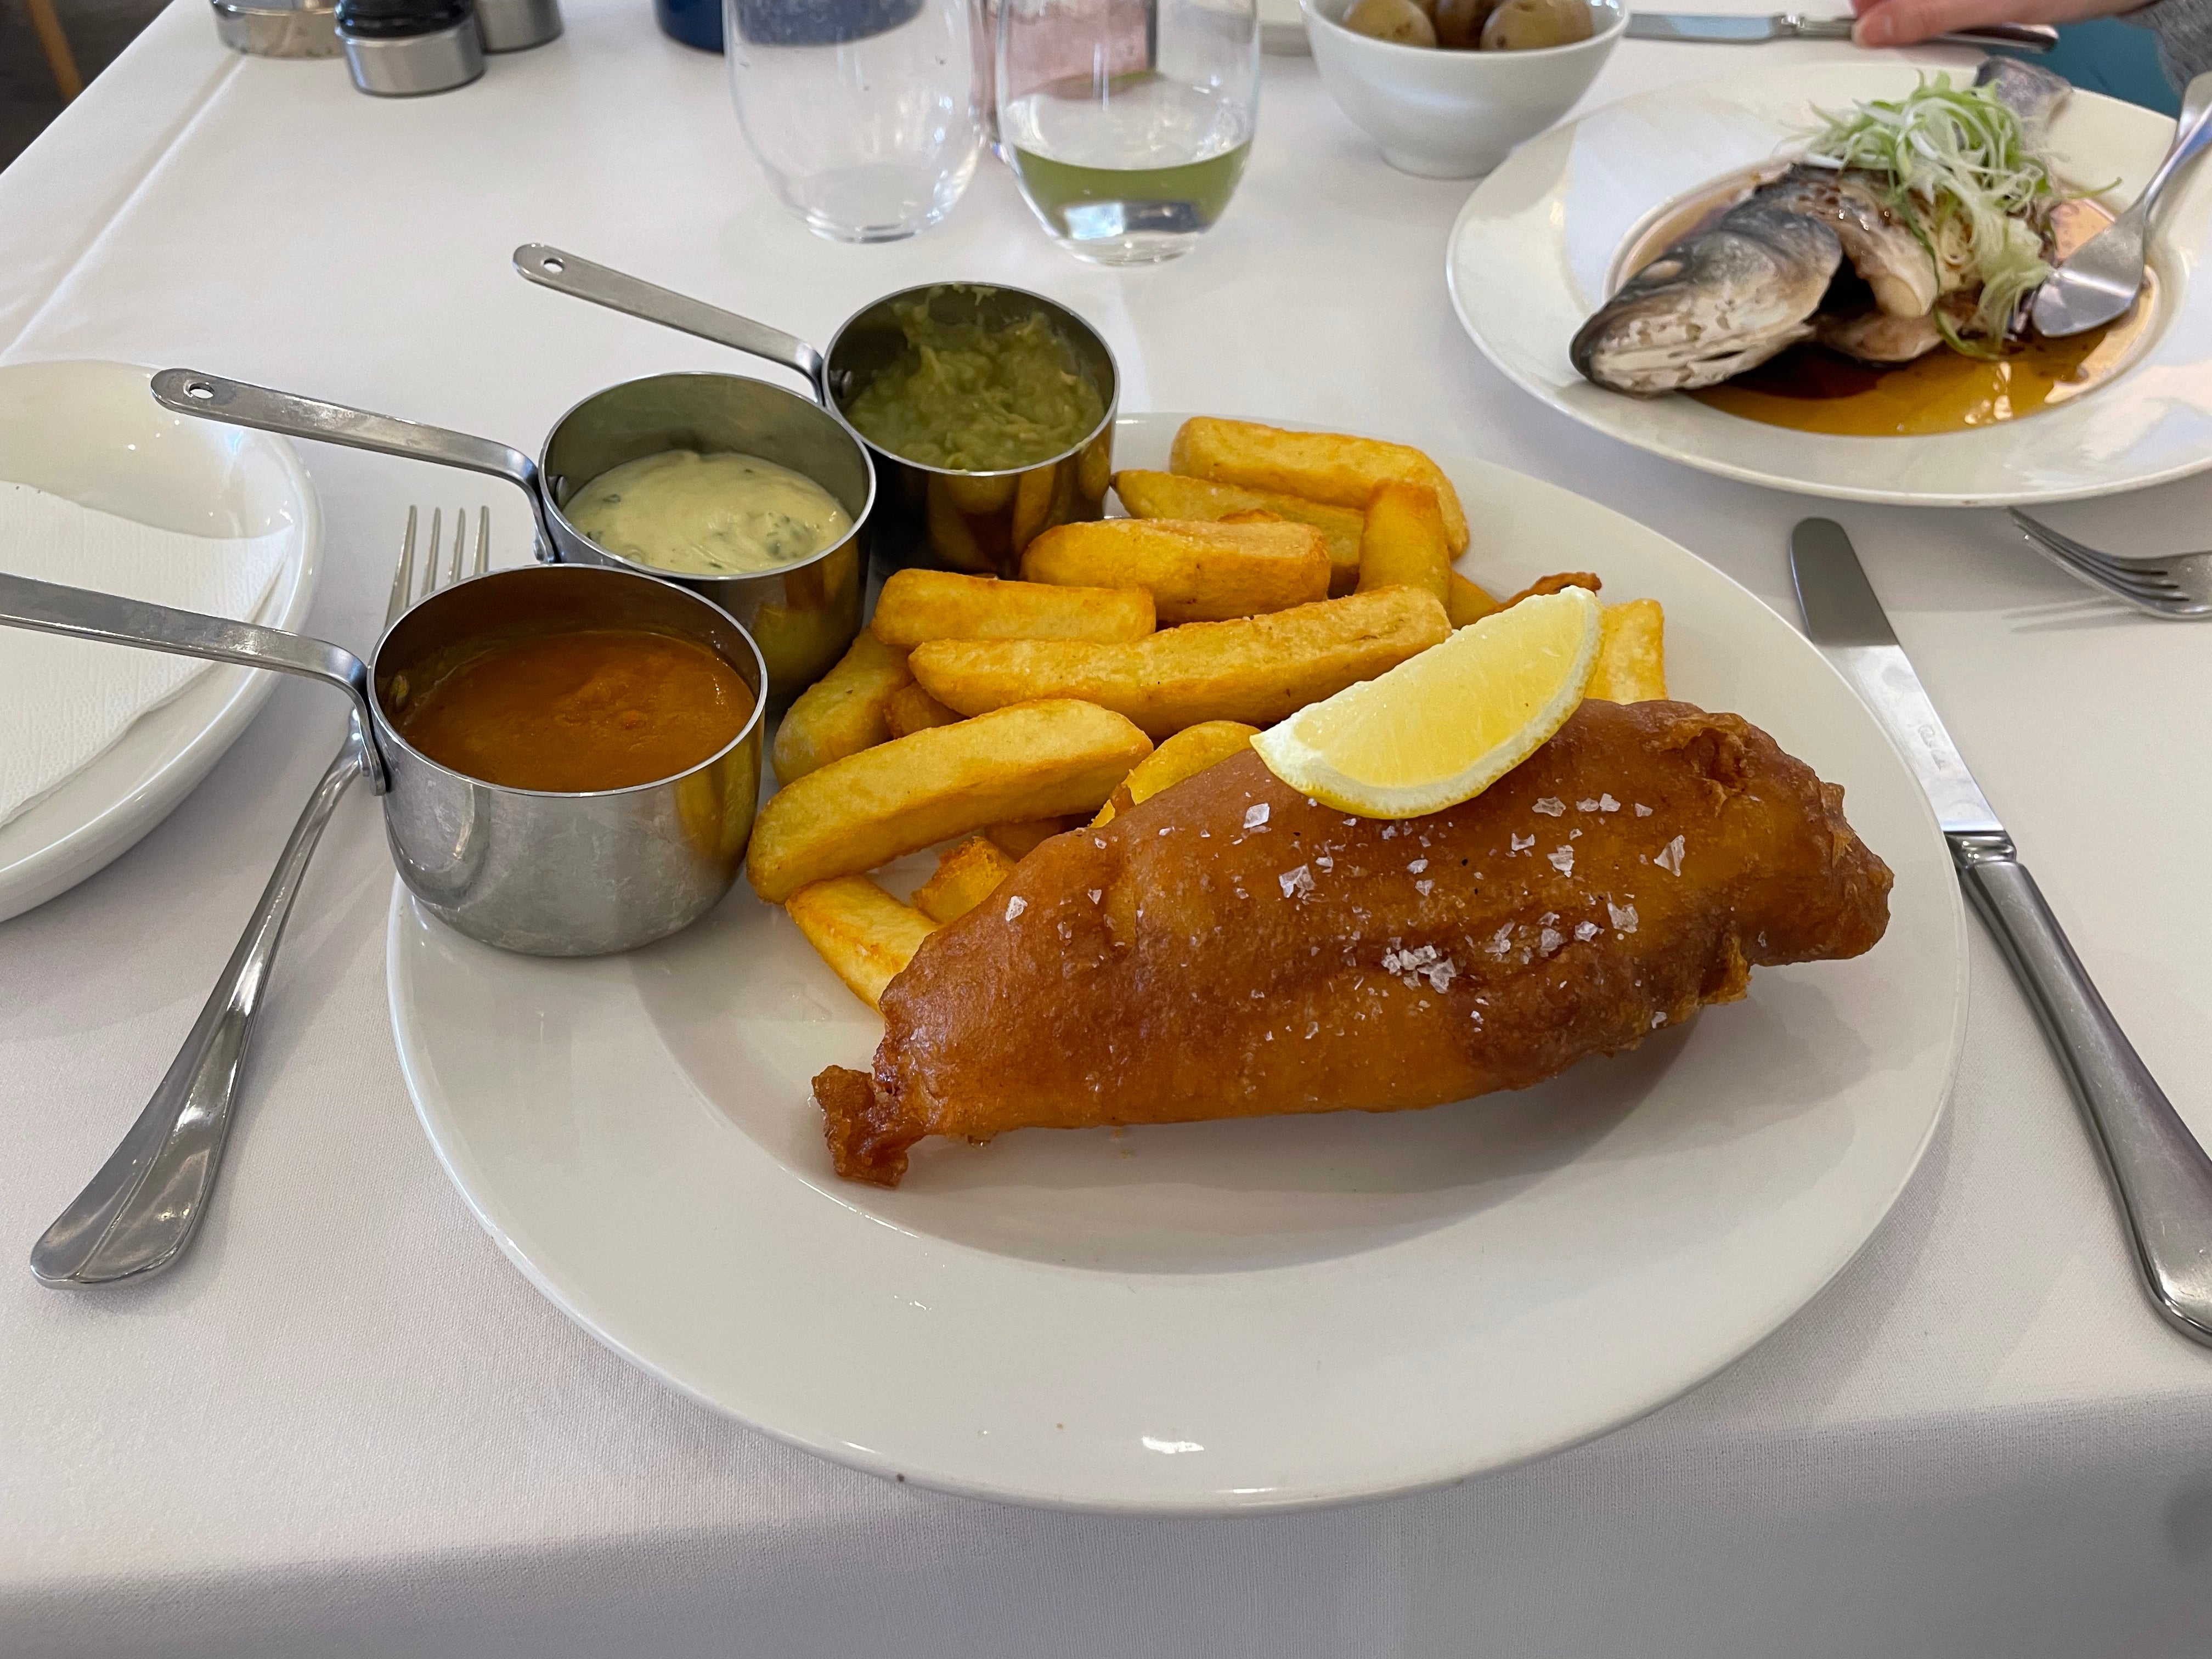 If you’re looking for a good fish and chips, look no further than Rick Stein’s at Sandbanks